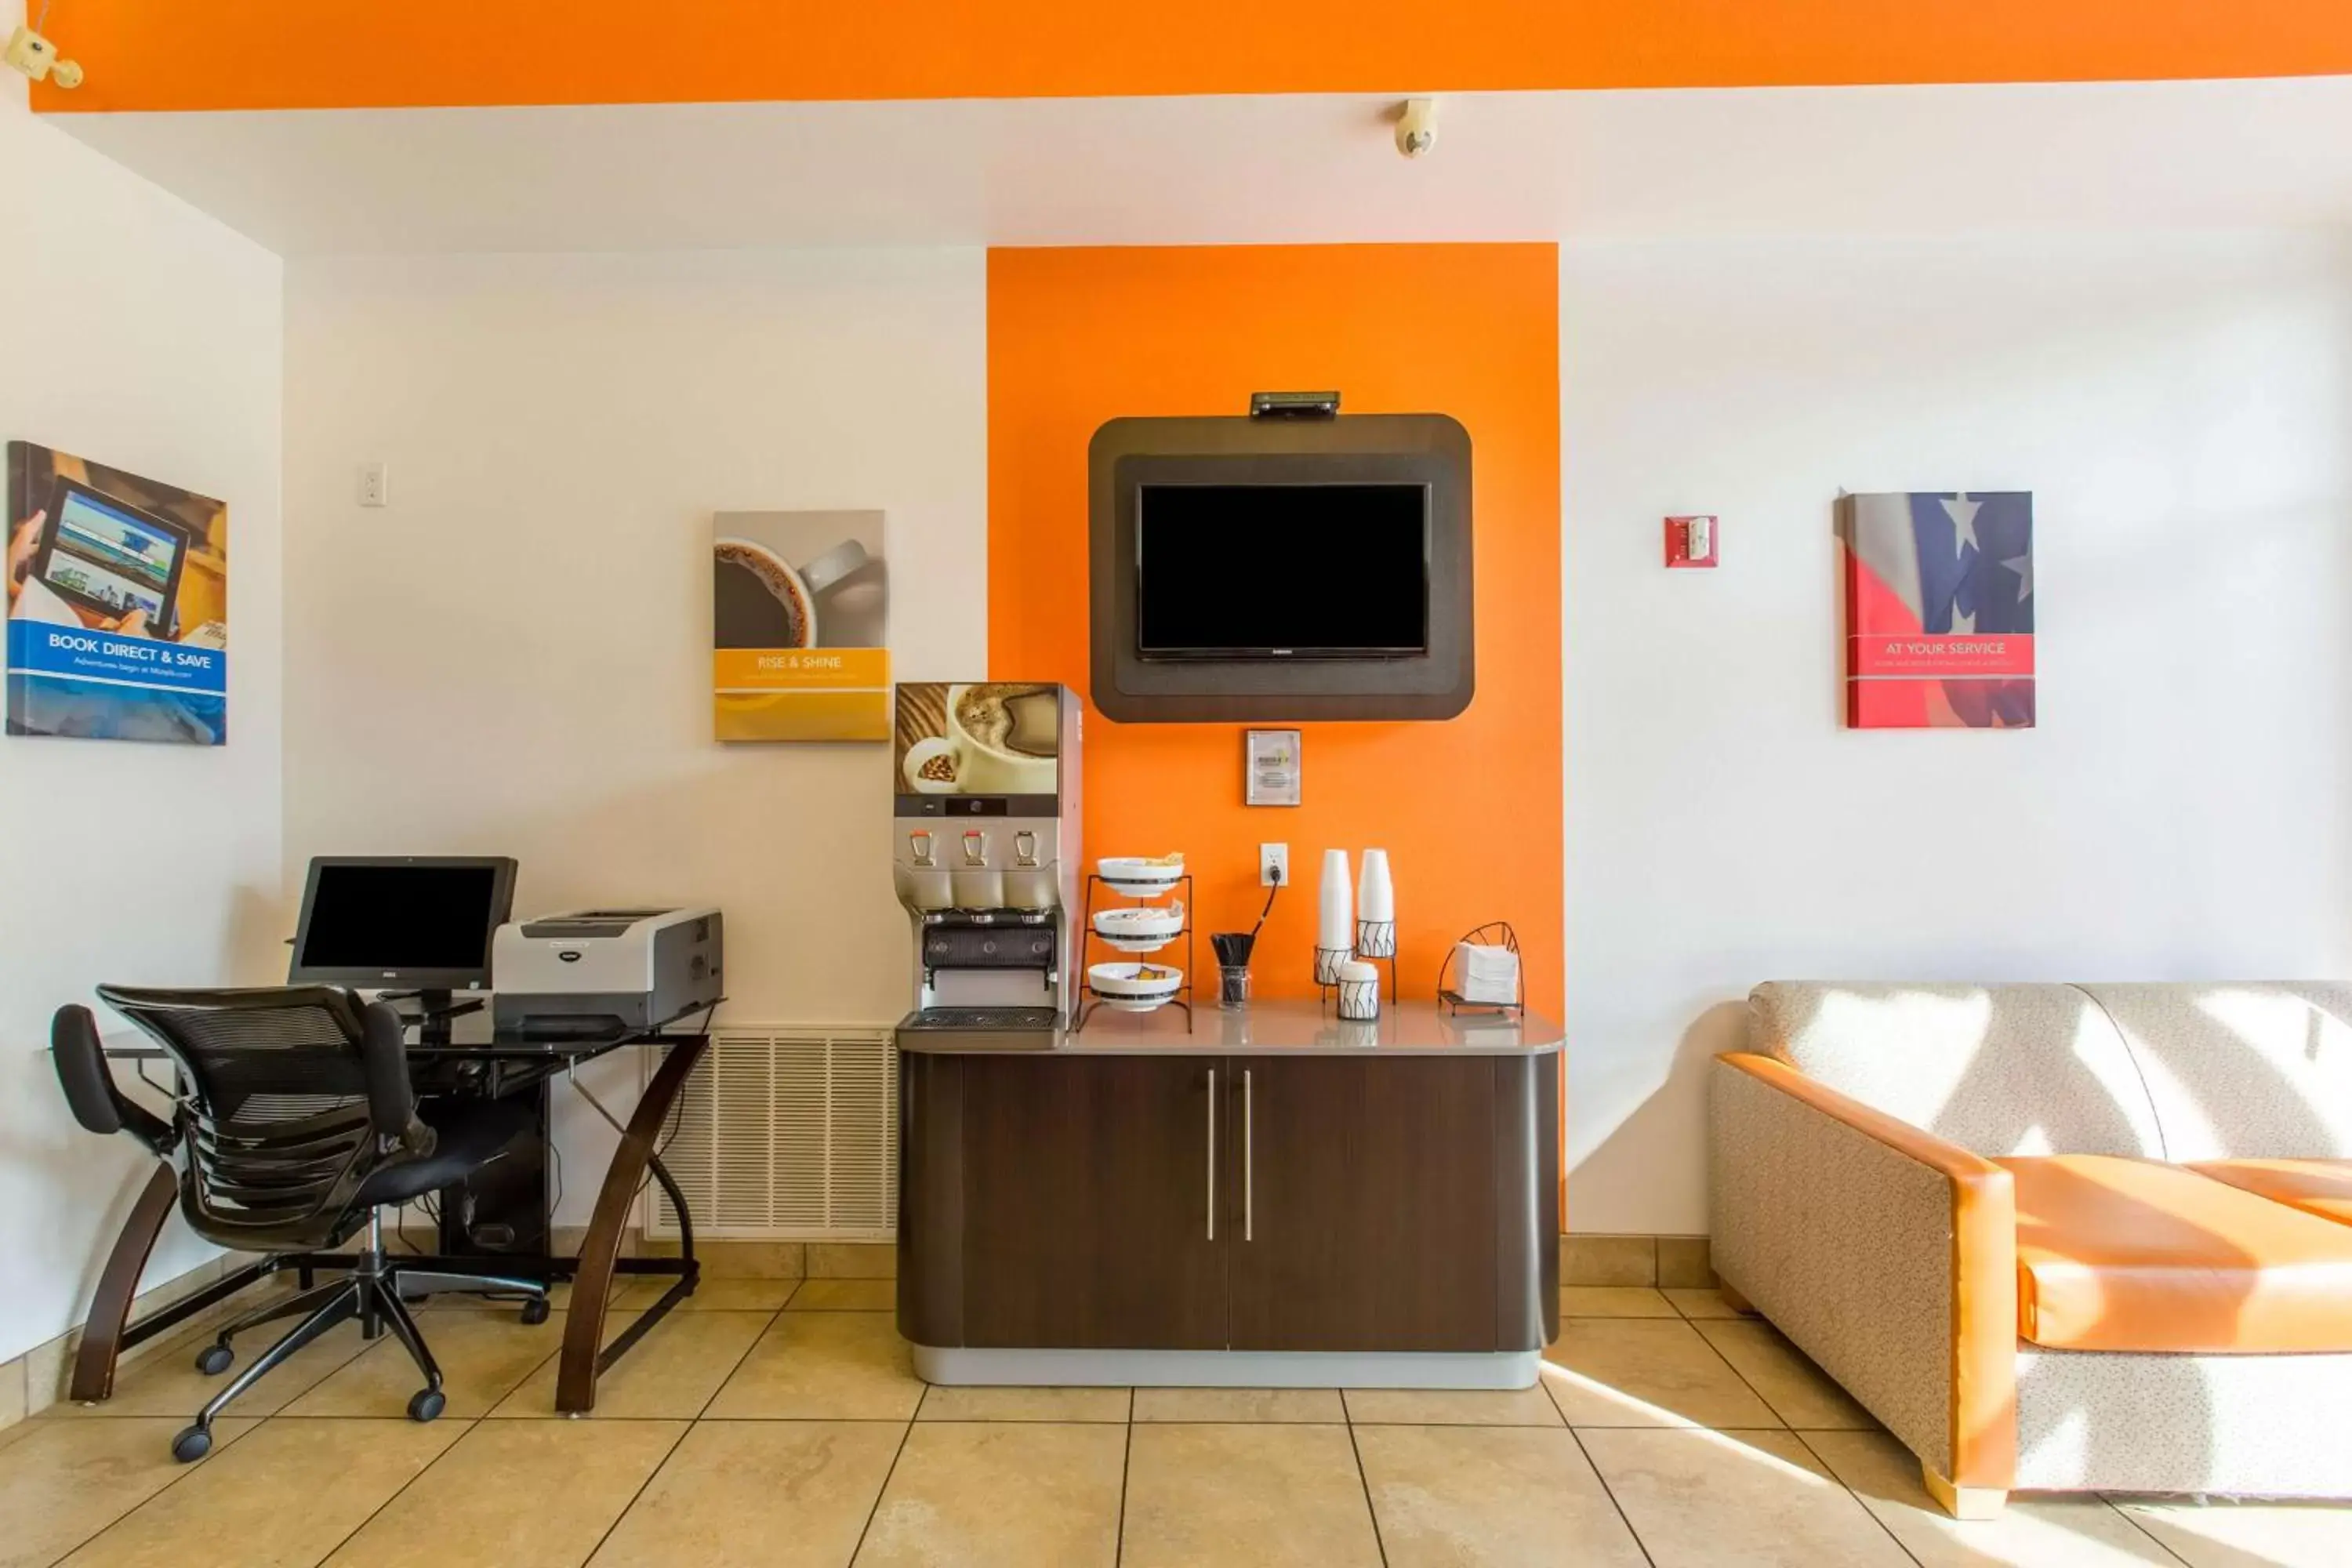 Restaurant/places to eat, TV/Entertainment Center in Motel 6-Baraboo, WI - Lake Delton